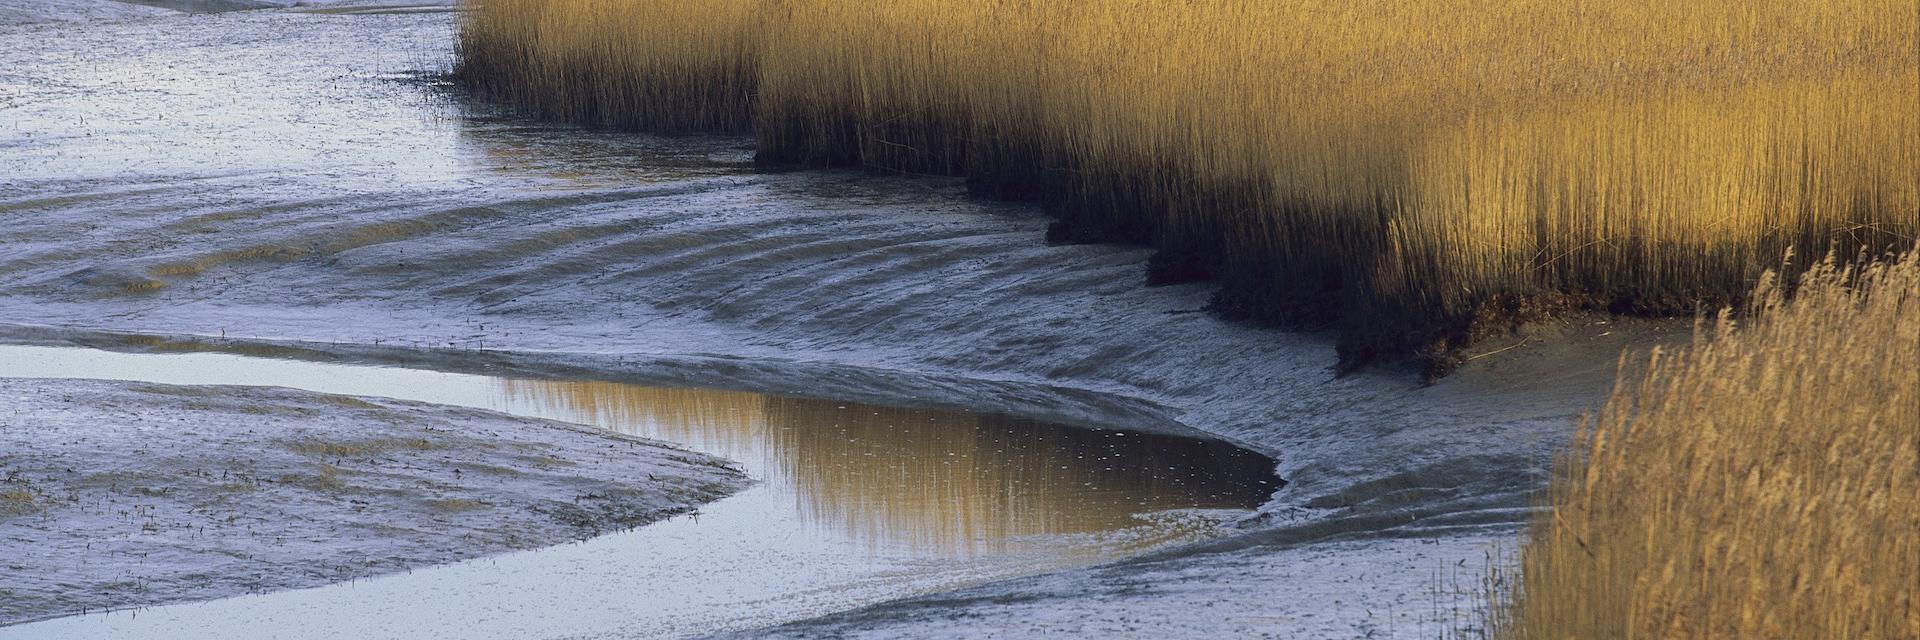 Reeds and mudflats on the North Sea in Holland.